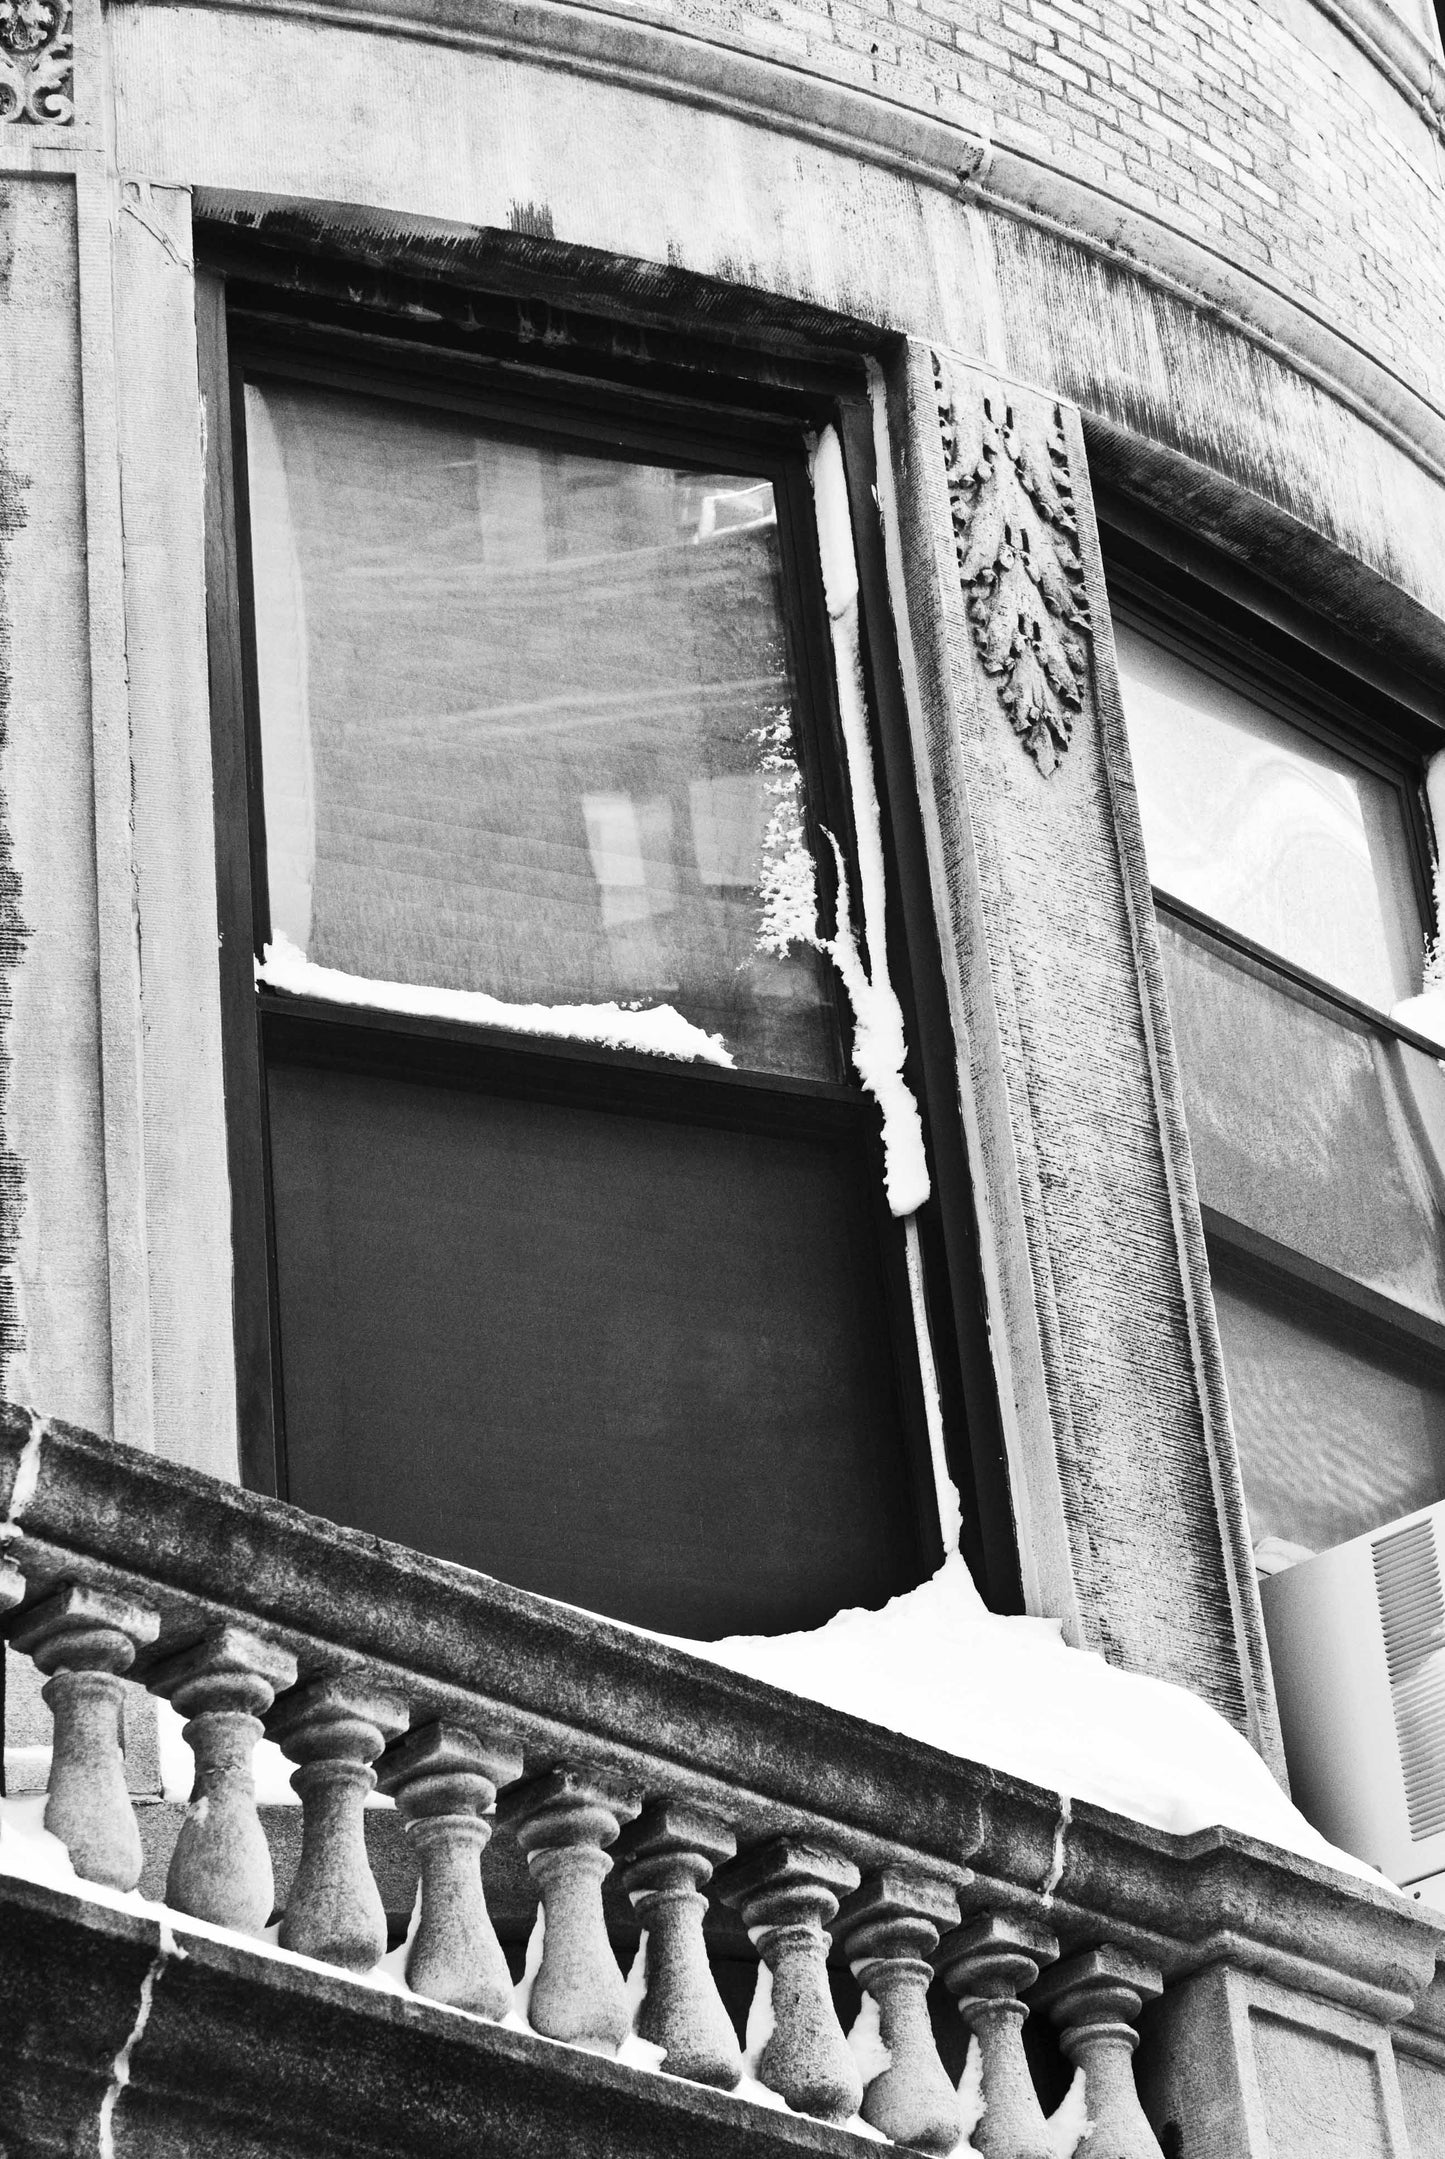 THE LOOK OF A WINDOW, New York